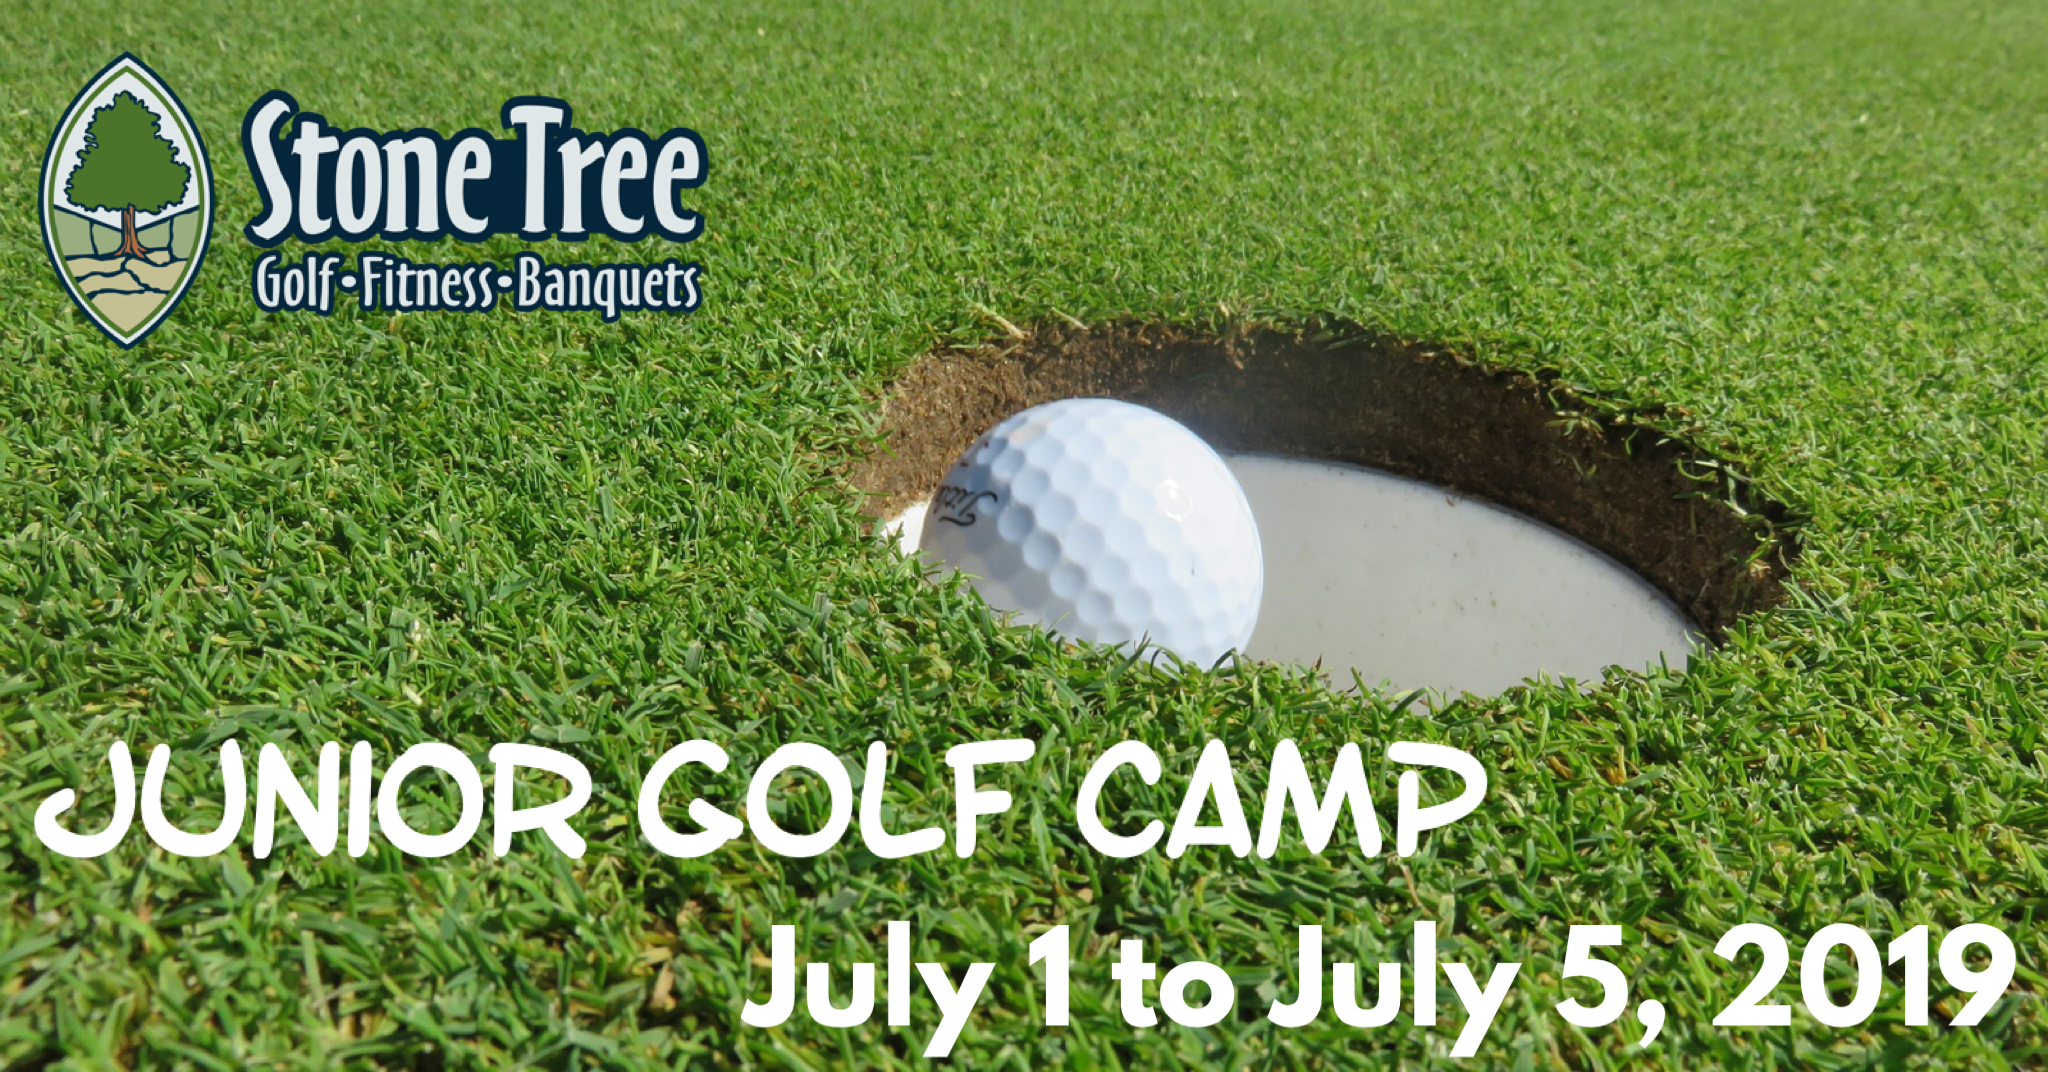 Junior Golf Camp - July 29 to Aug 2, 2019